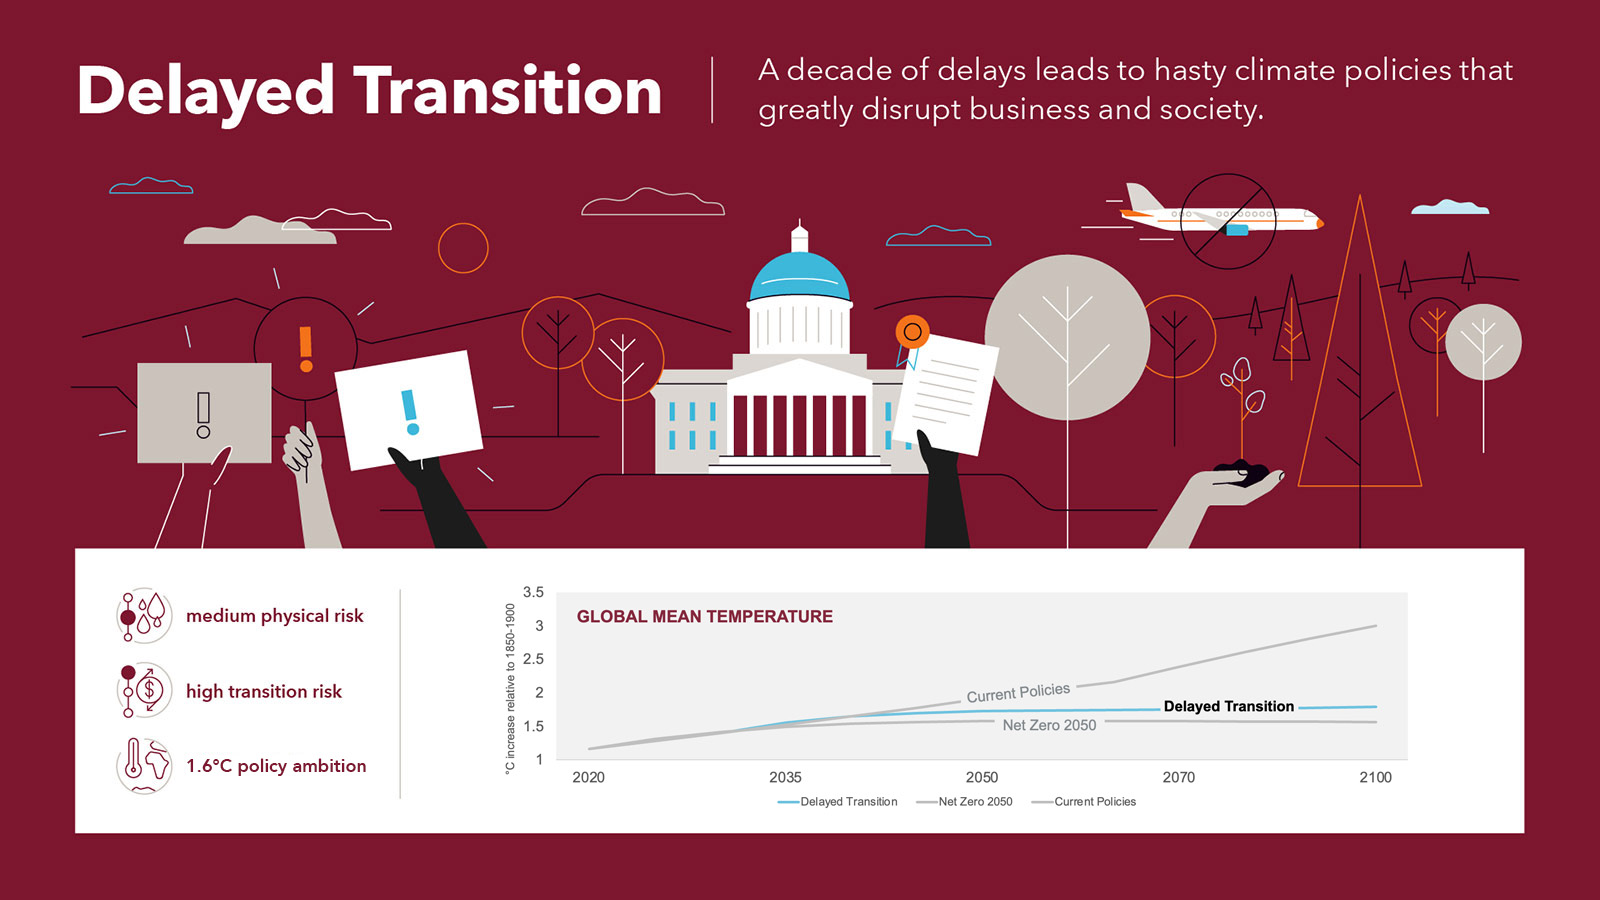 Scenario 3: Delayed Transition, A decade of delays leads to hasty climate policies that greatly disrupt business and society.